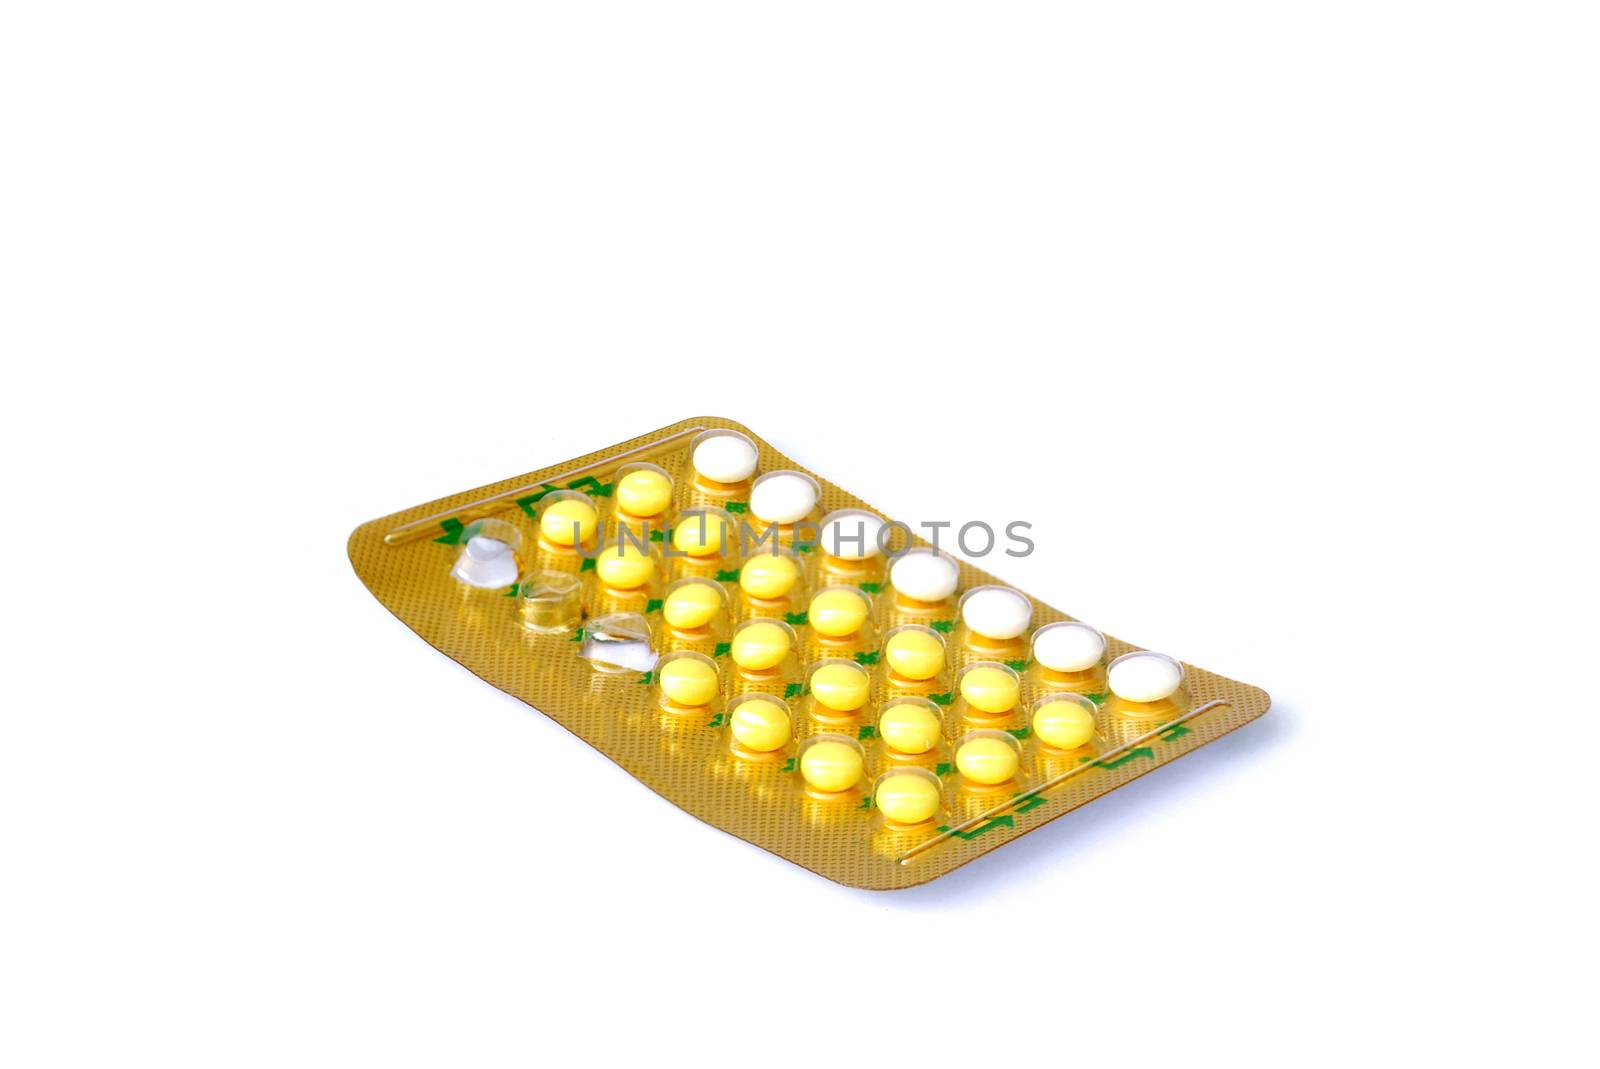 28 pill contraceptives on white background.